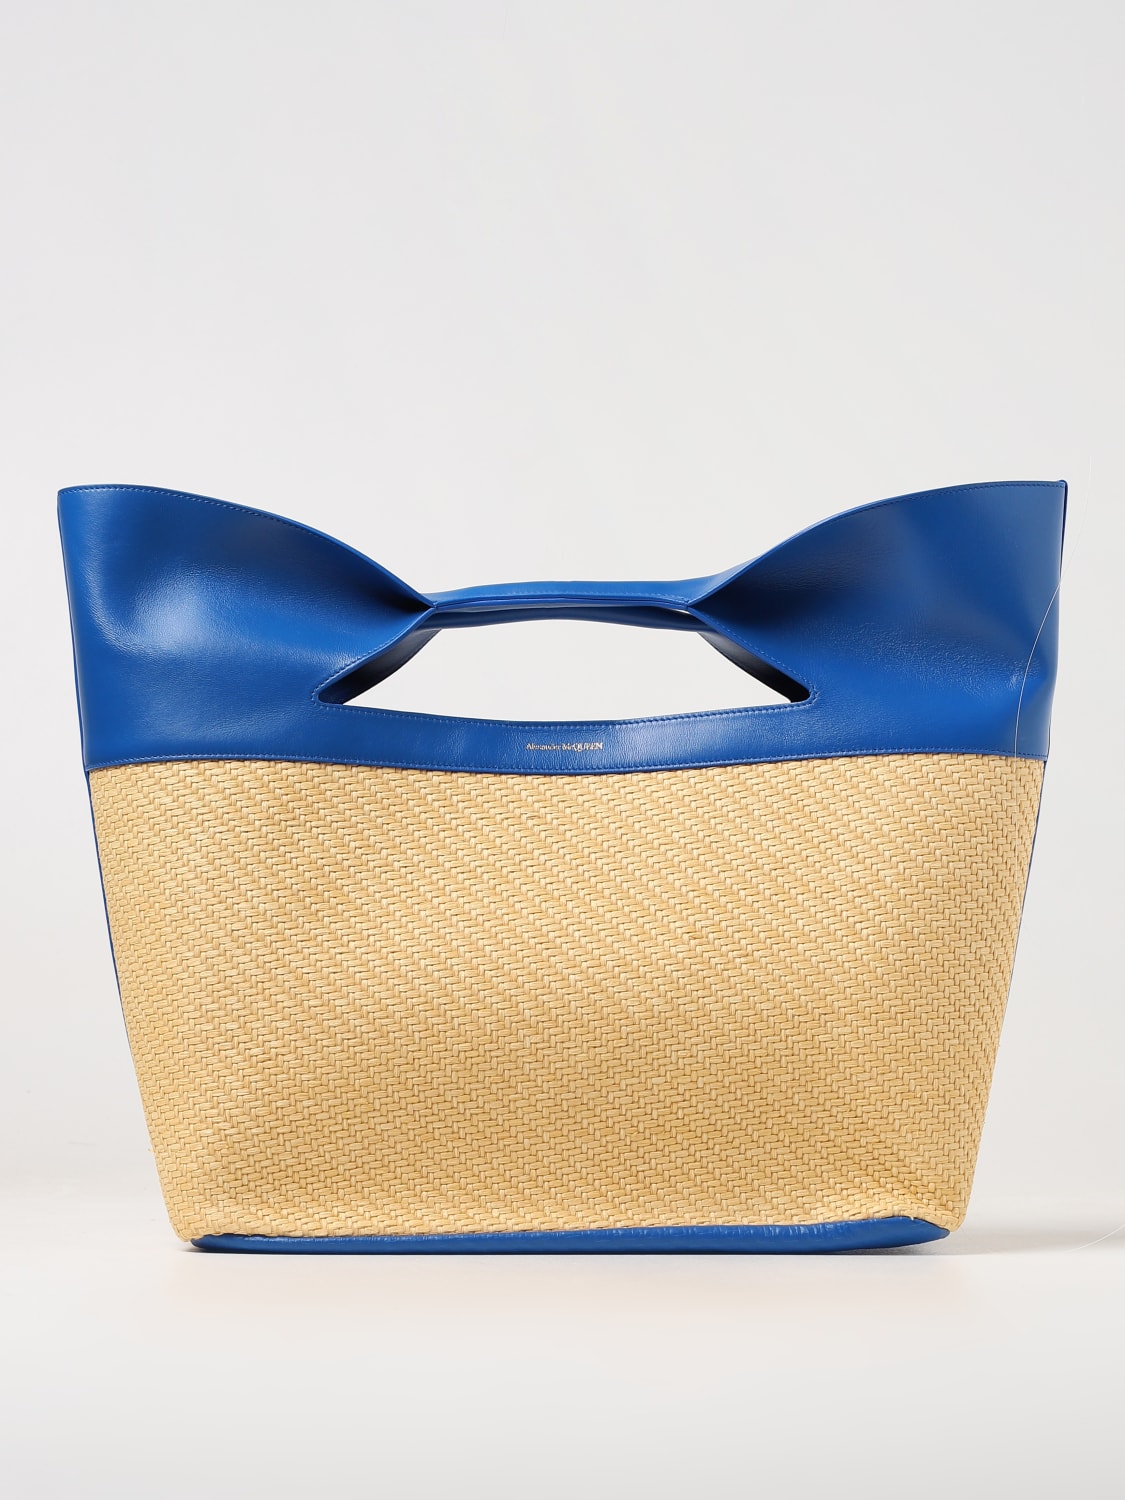 ALEXANDER MCQUEEN: The Bow bag in woven raffia and leather - Blue